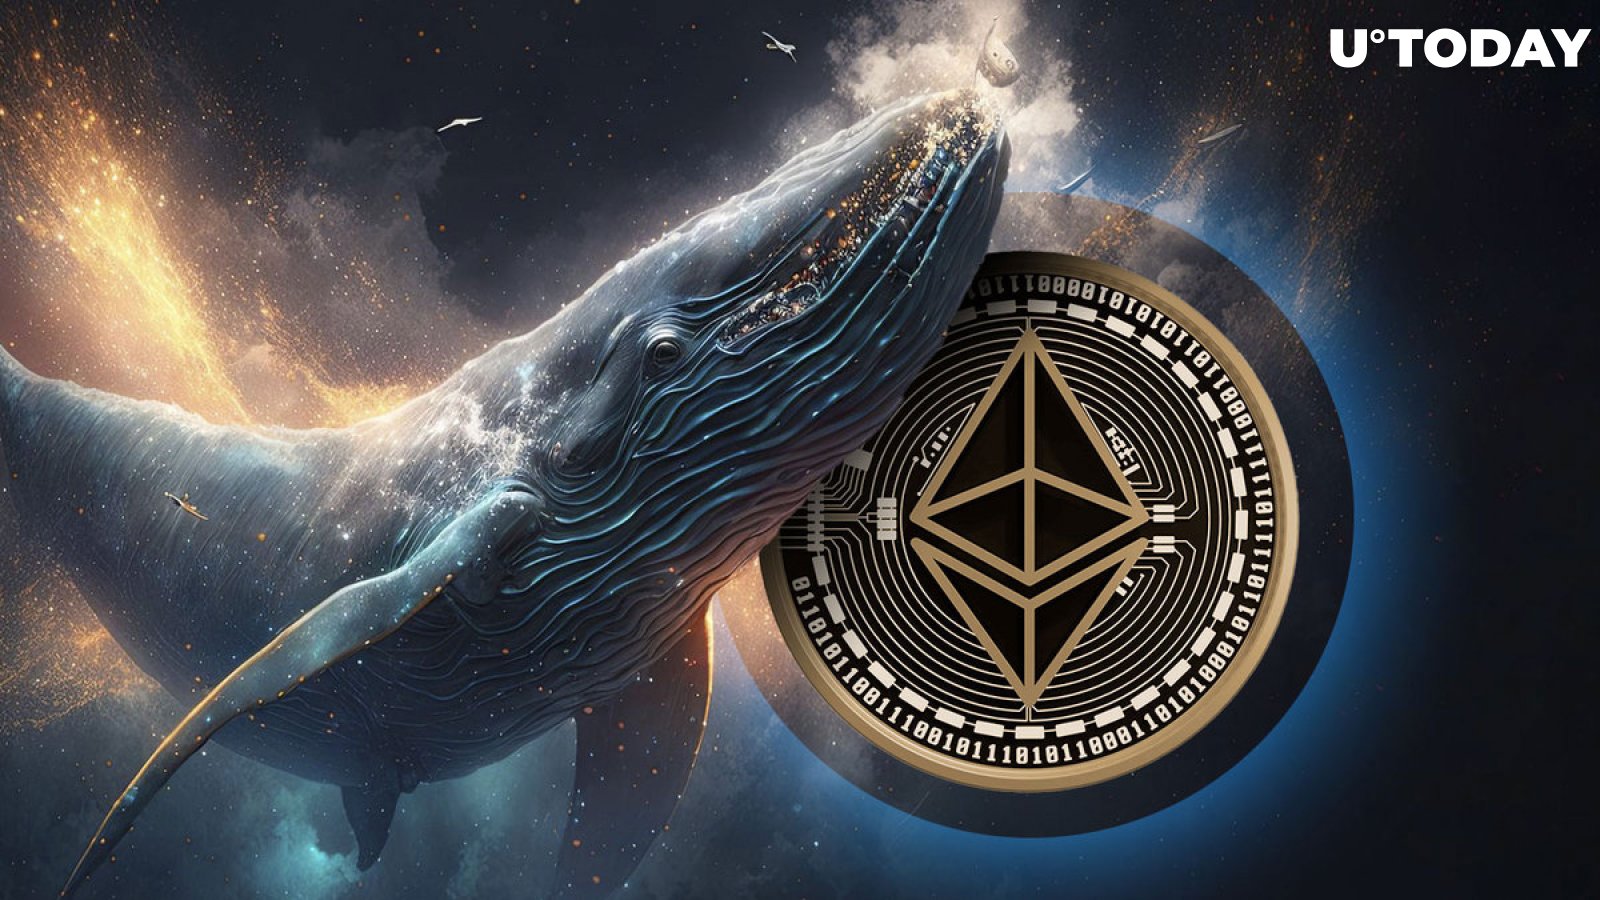 Dormant Ethereum (ETH) Whale Reawakens to Spark Sell-off Fears